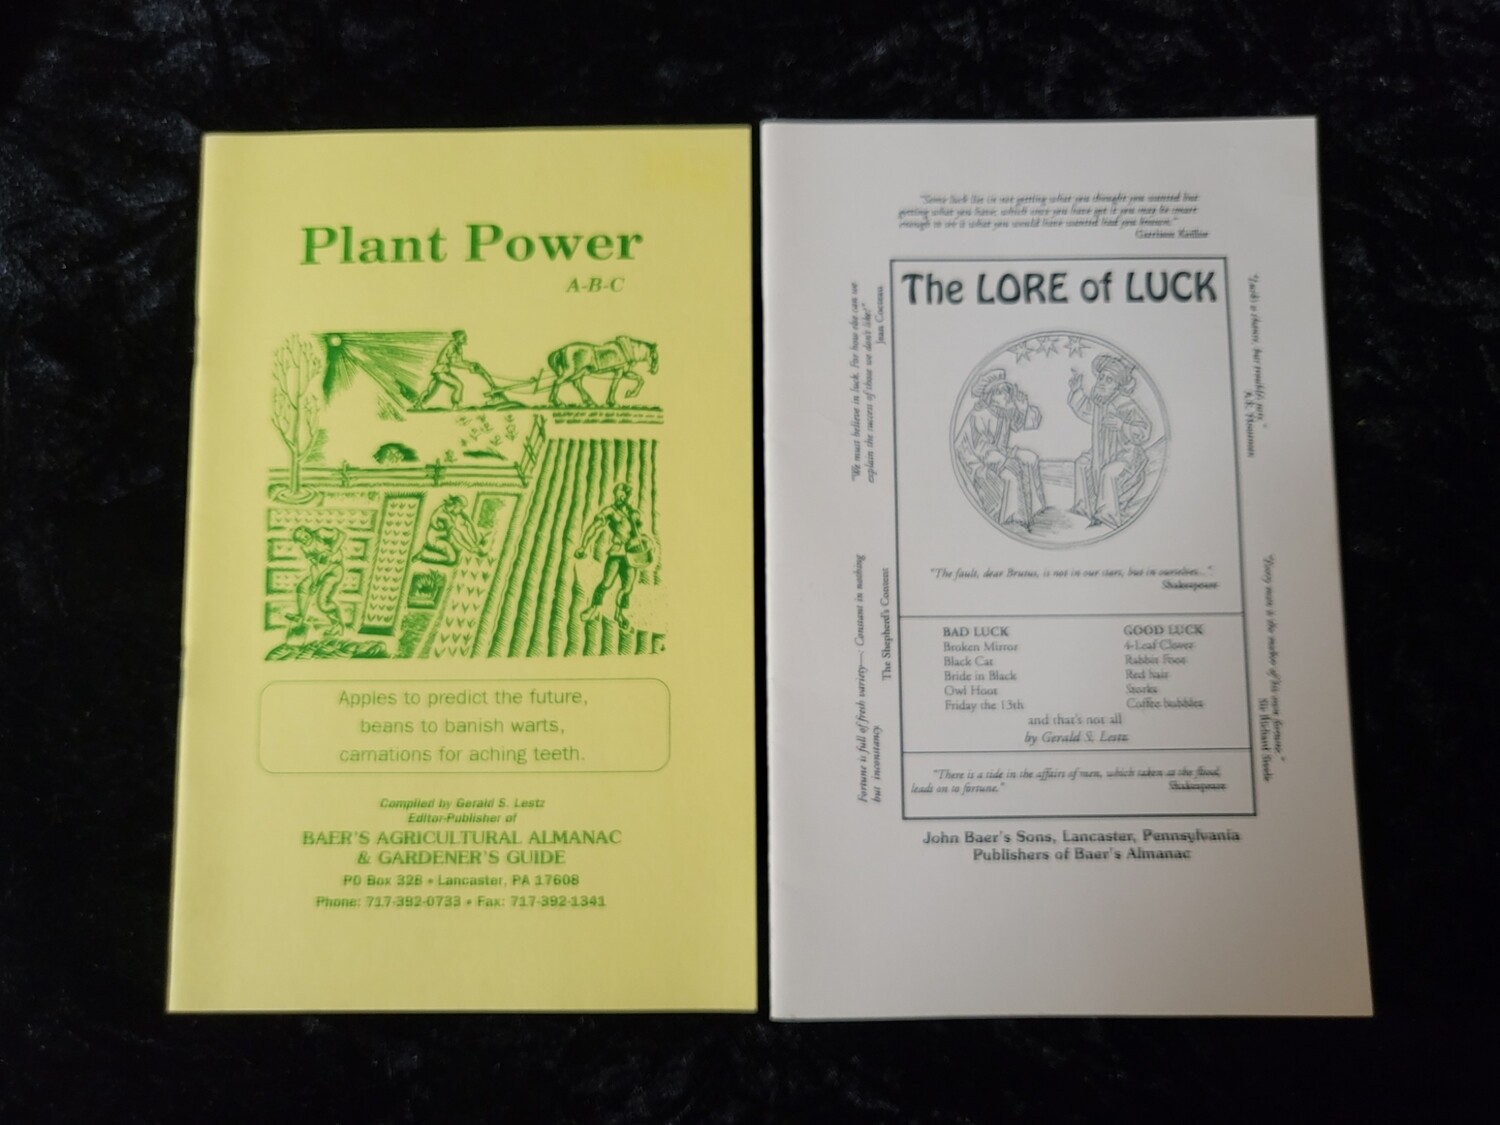 Plant Power and The Lore of Luck book set